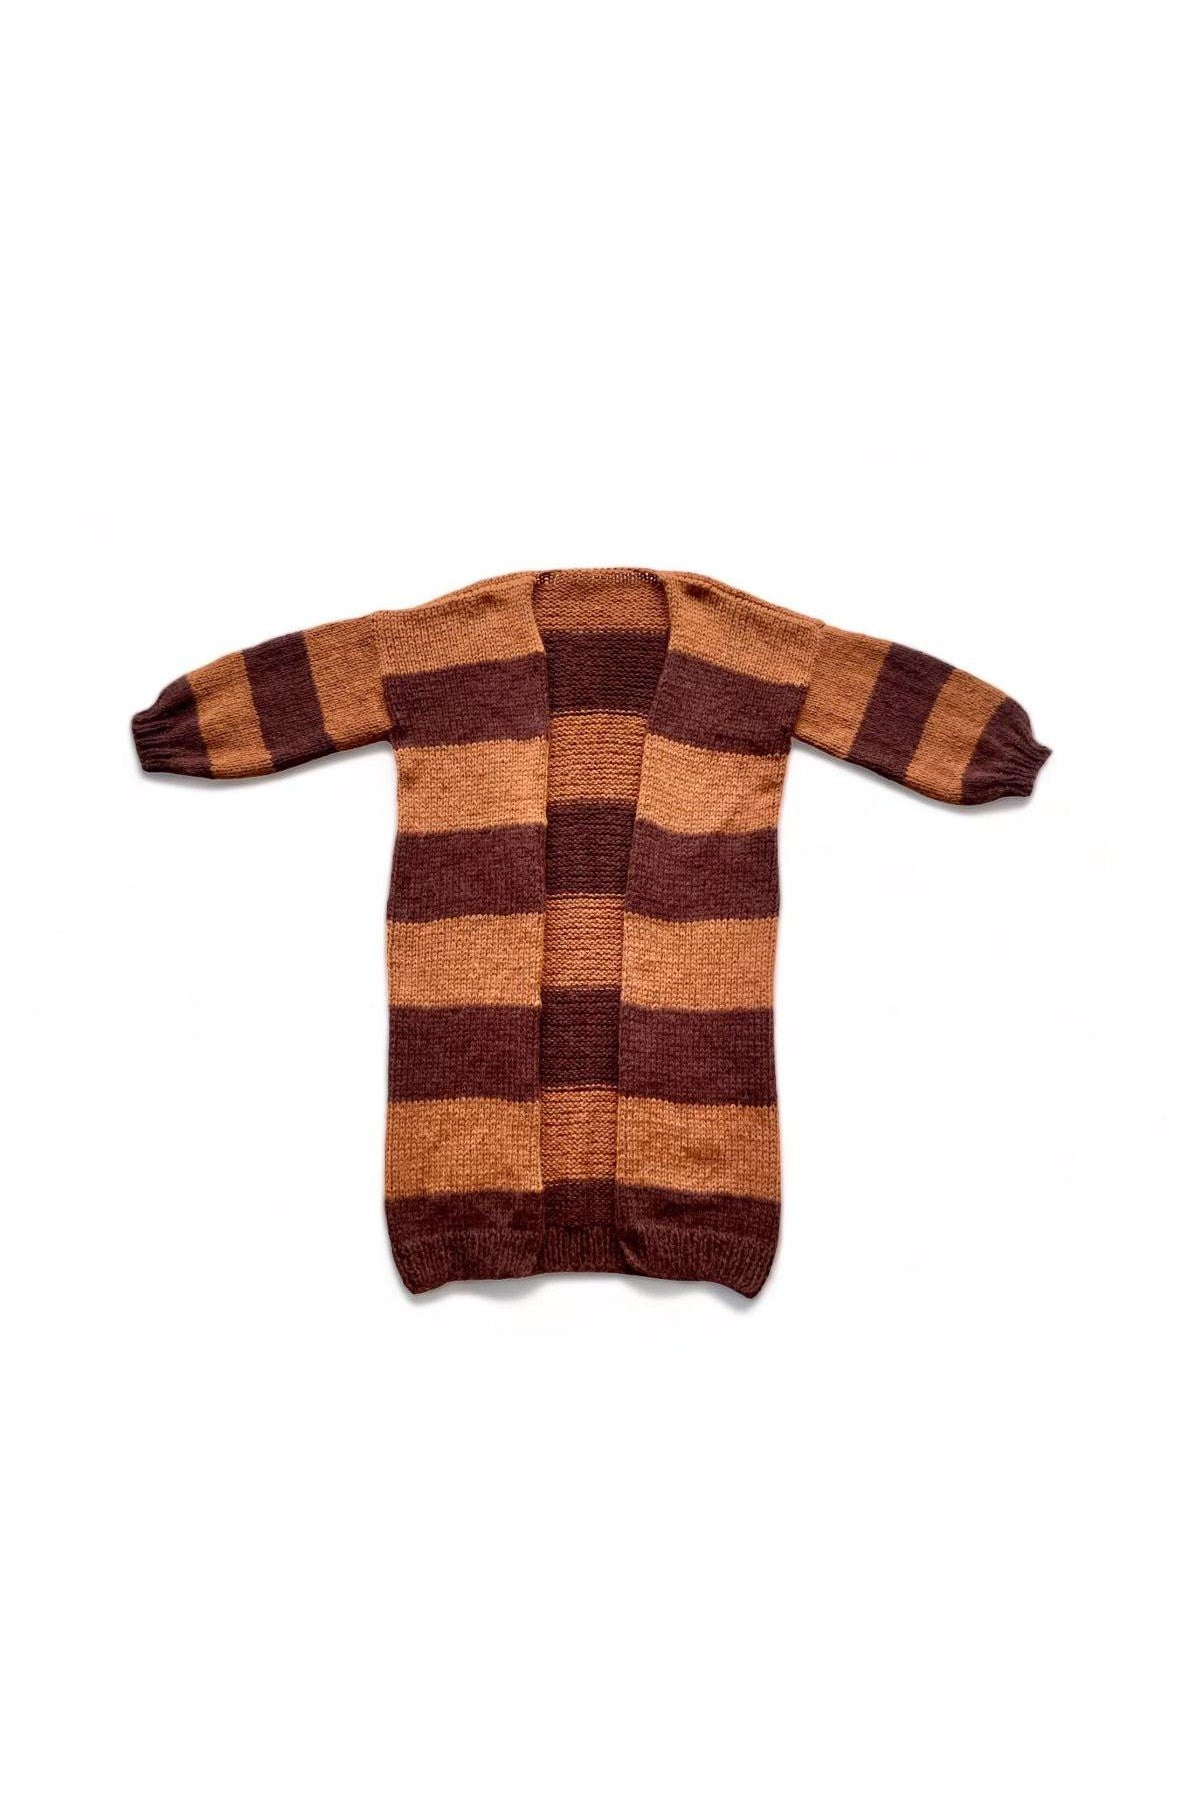 Hand Knitted Brown Striped Cardigan - Mack & Harvie